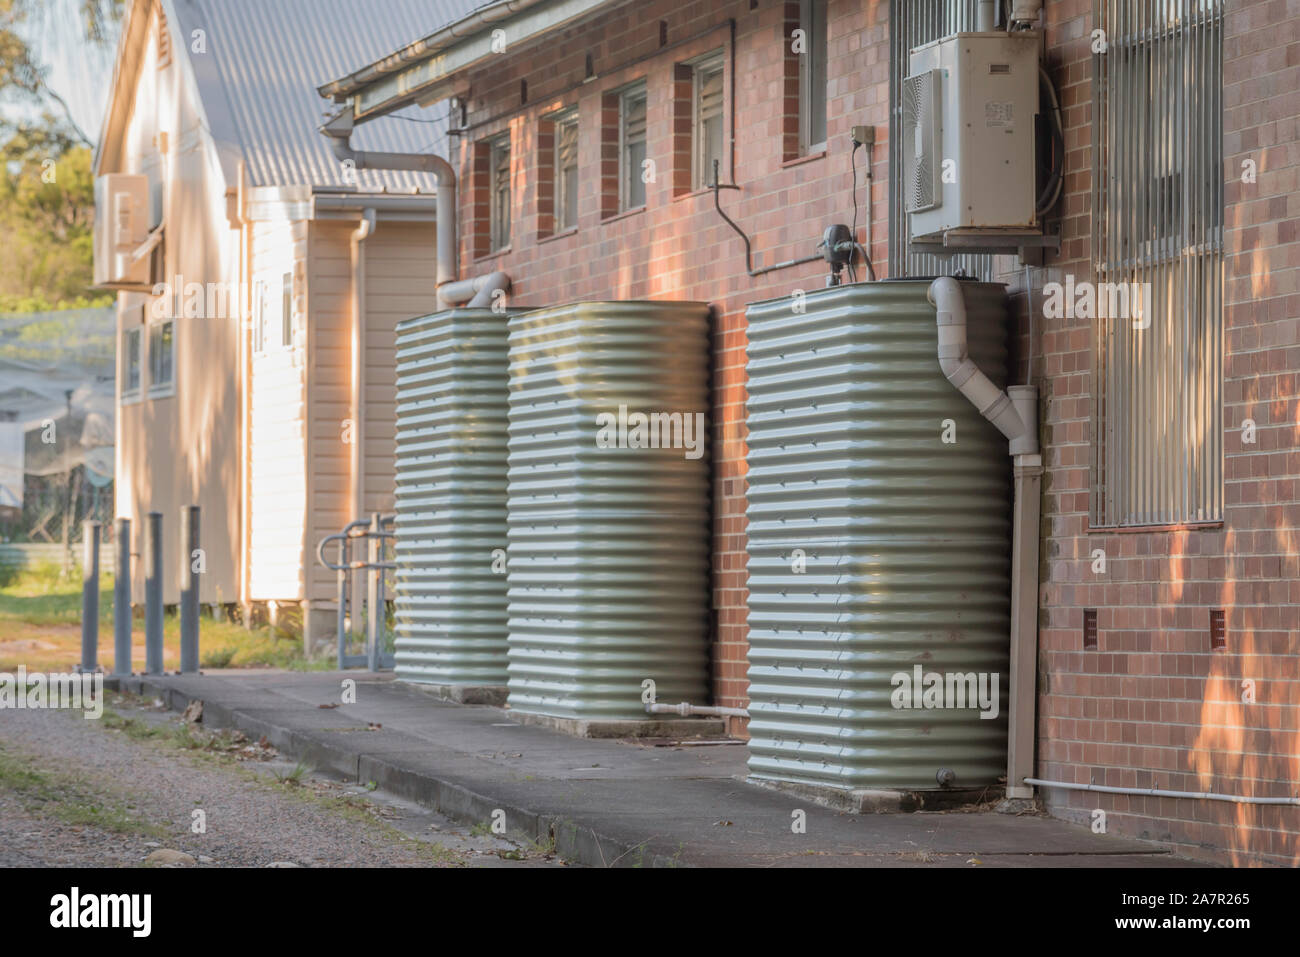 Water Storage Tanks High Resolution Stock Photography and Images - Alamy